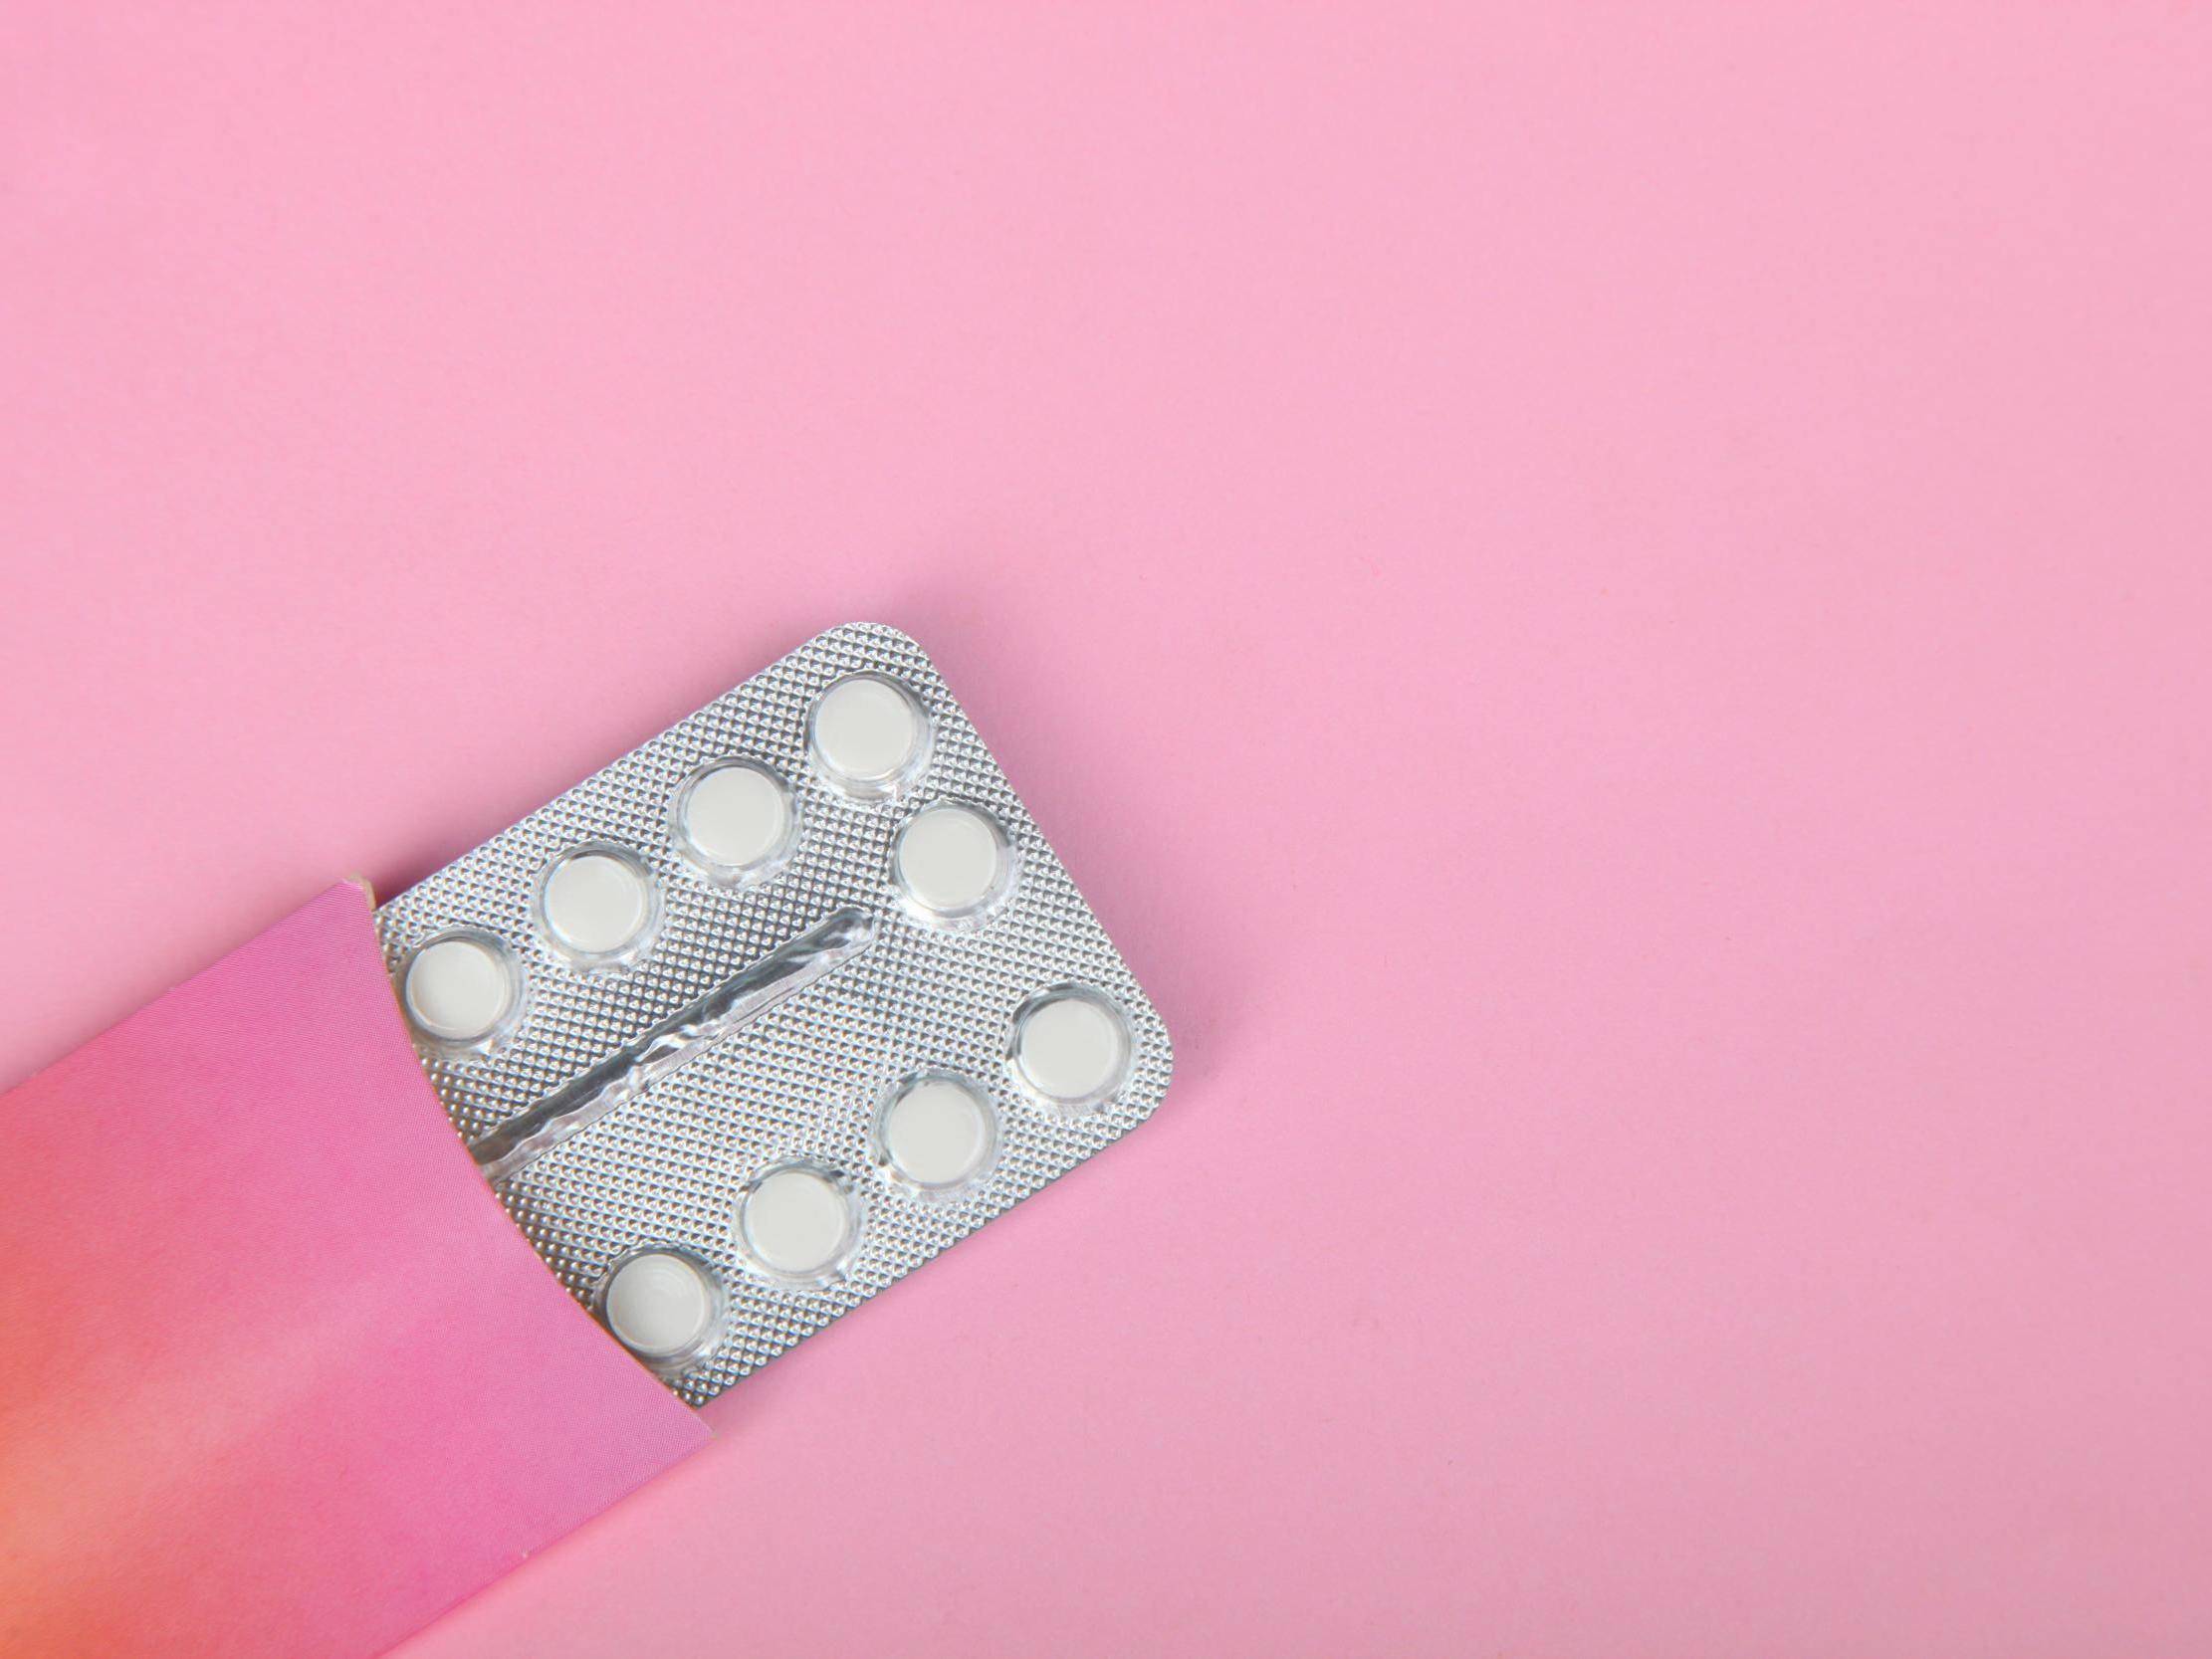 Scientists are developing a contraceptive pill you only need to take once a month